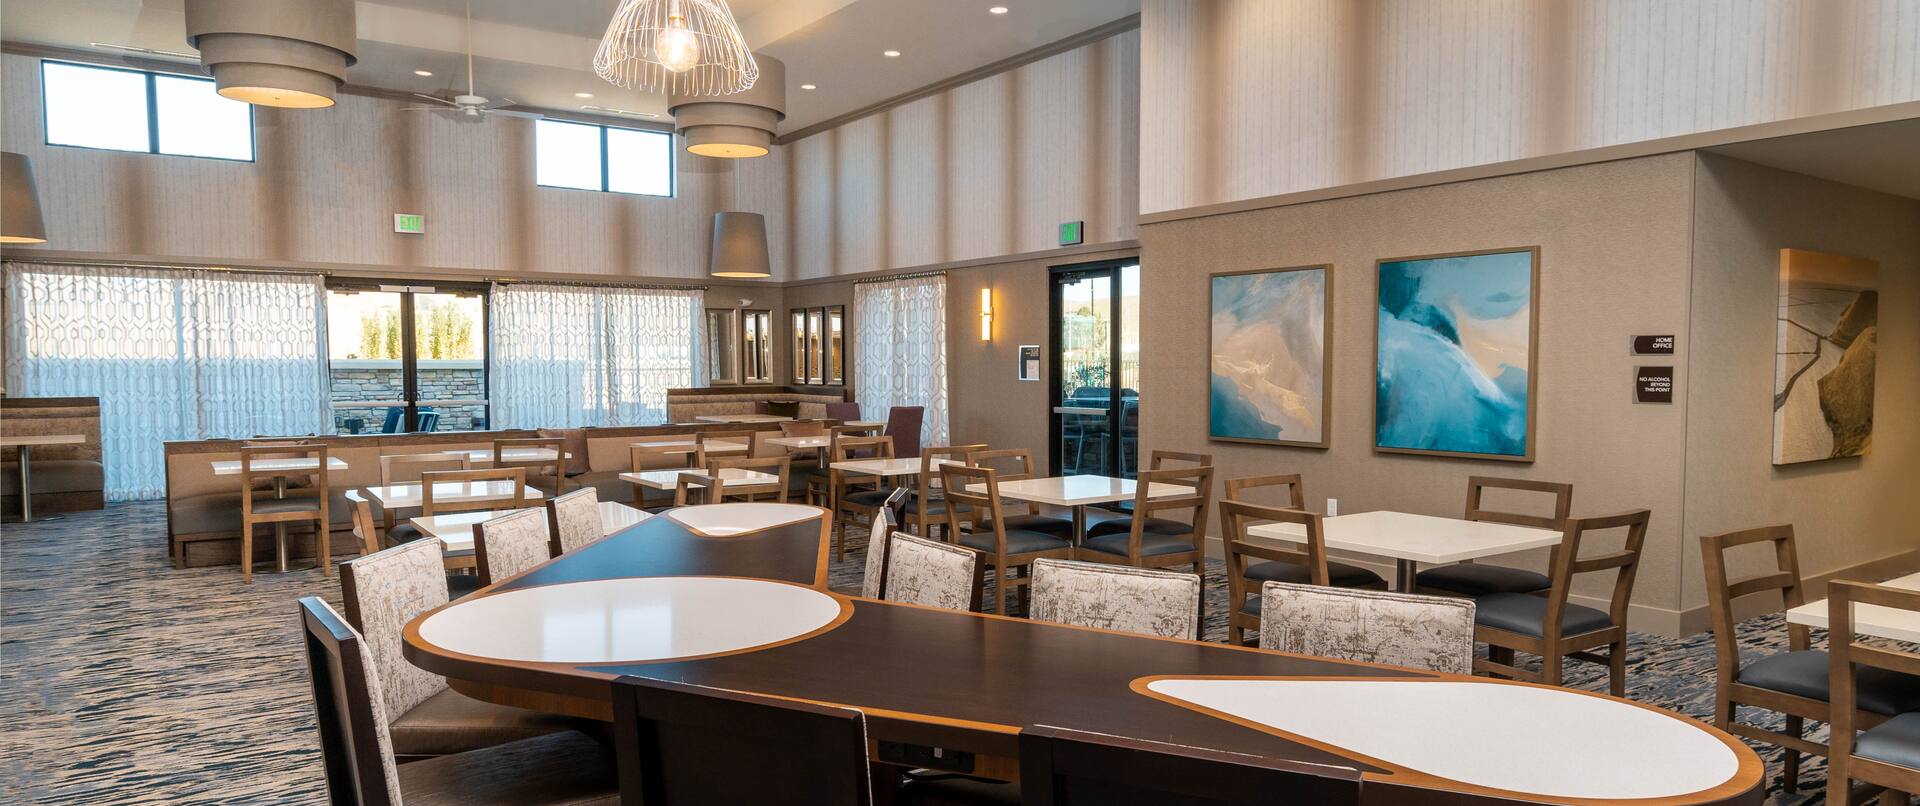 Dining Area in Lobby